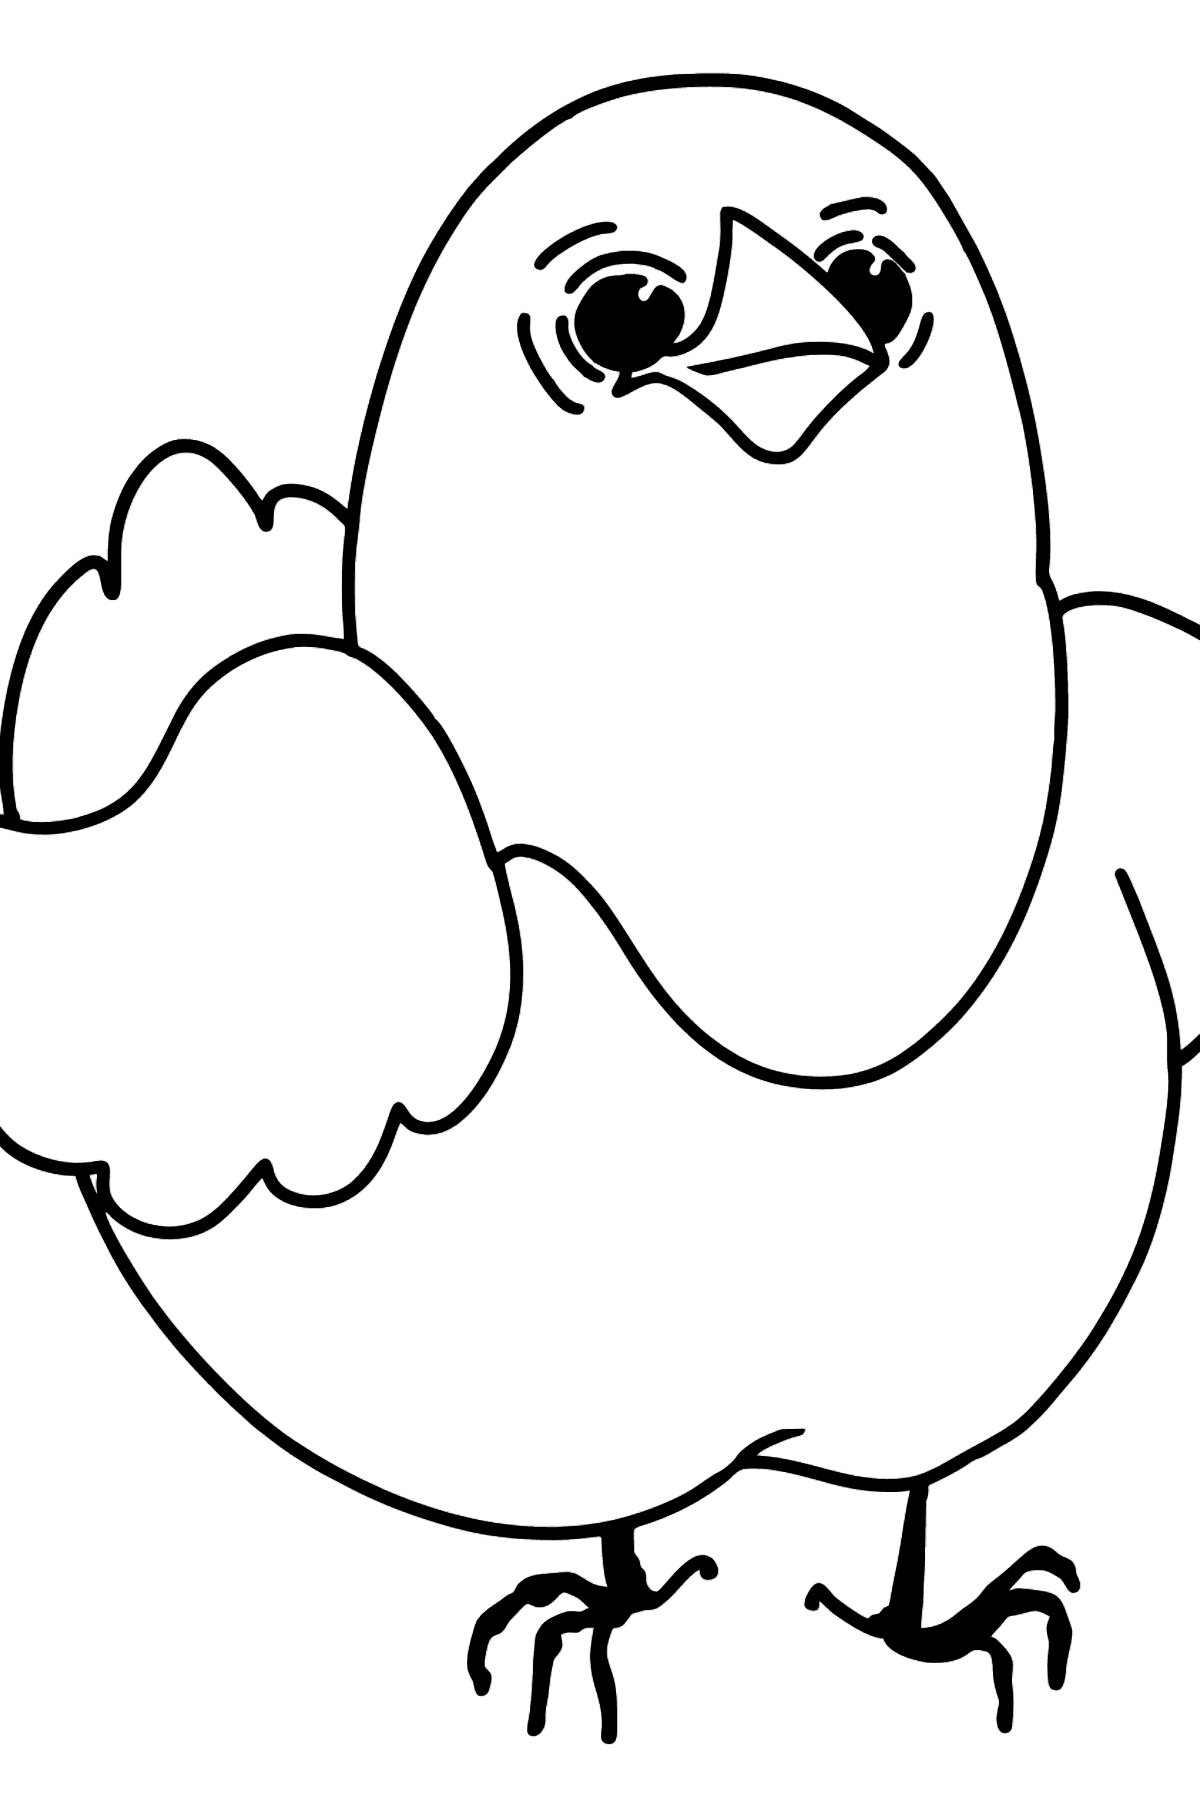 Chicken coloring page - Coloring Pages for Kids